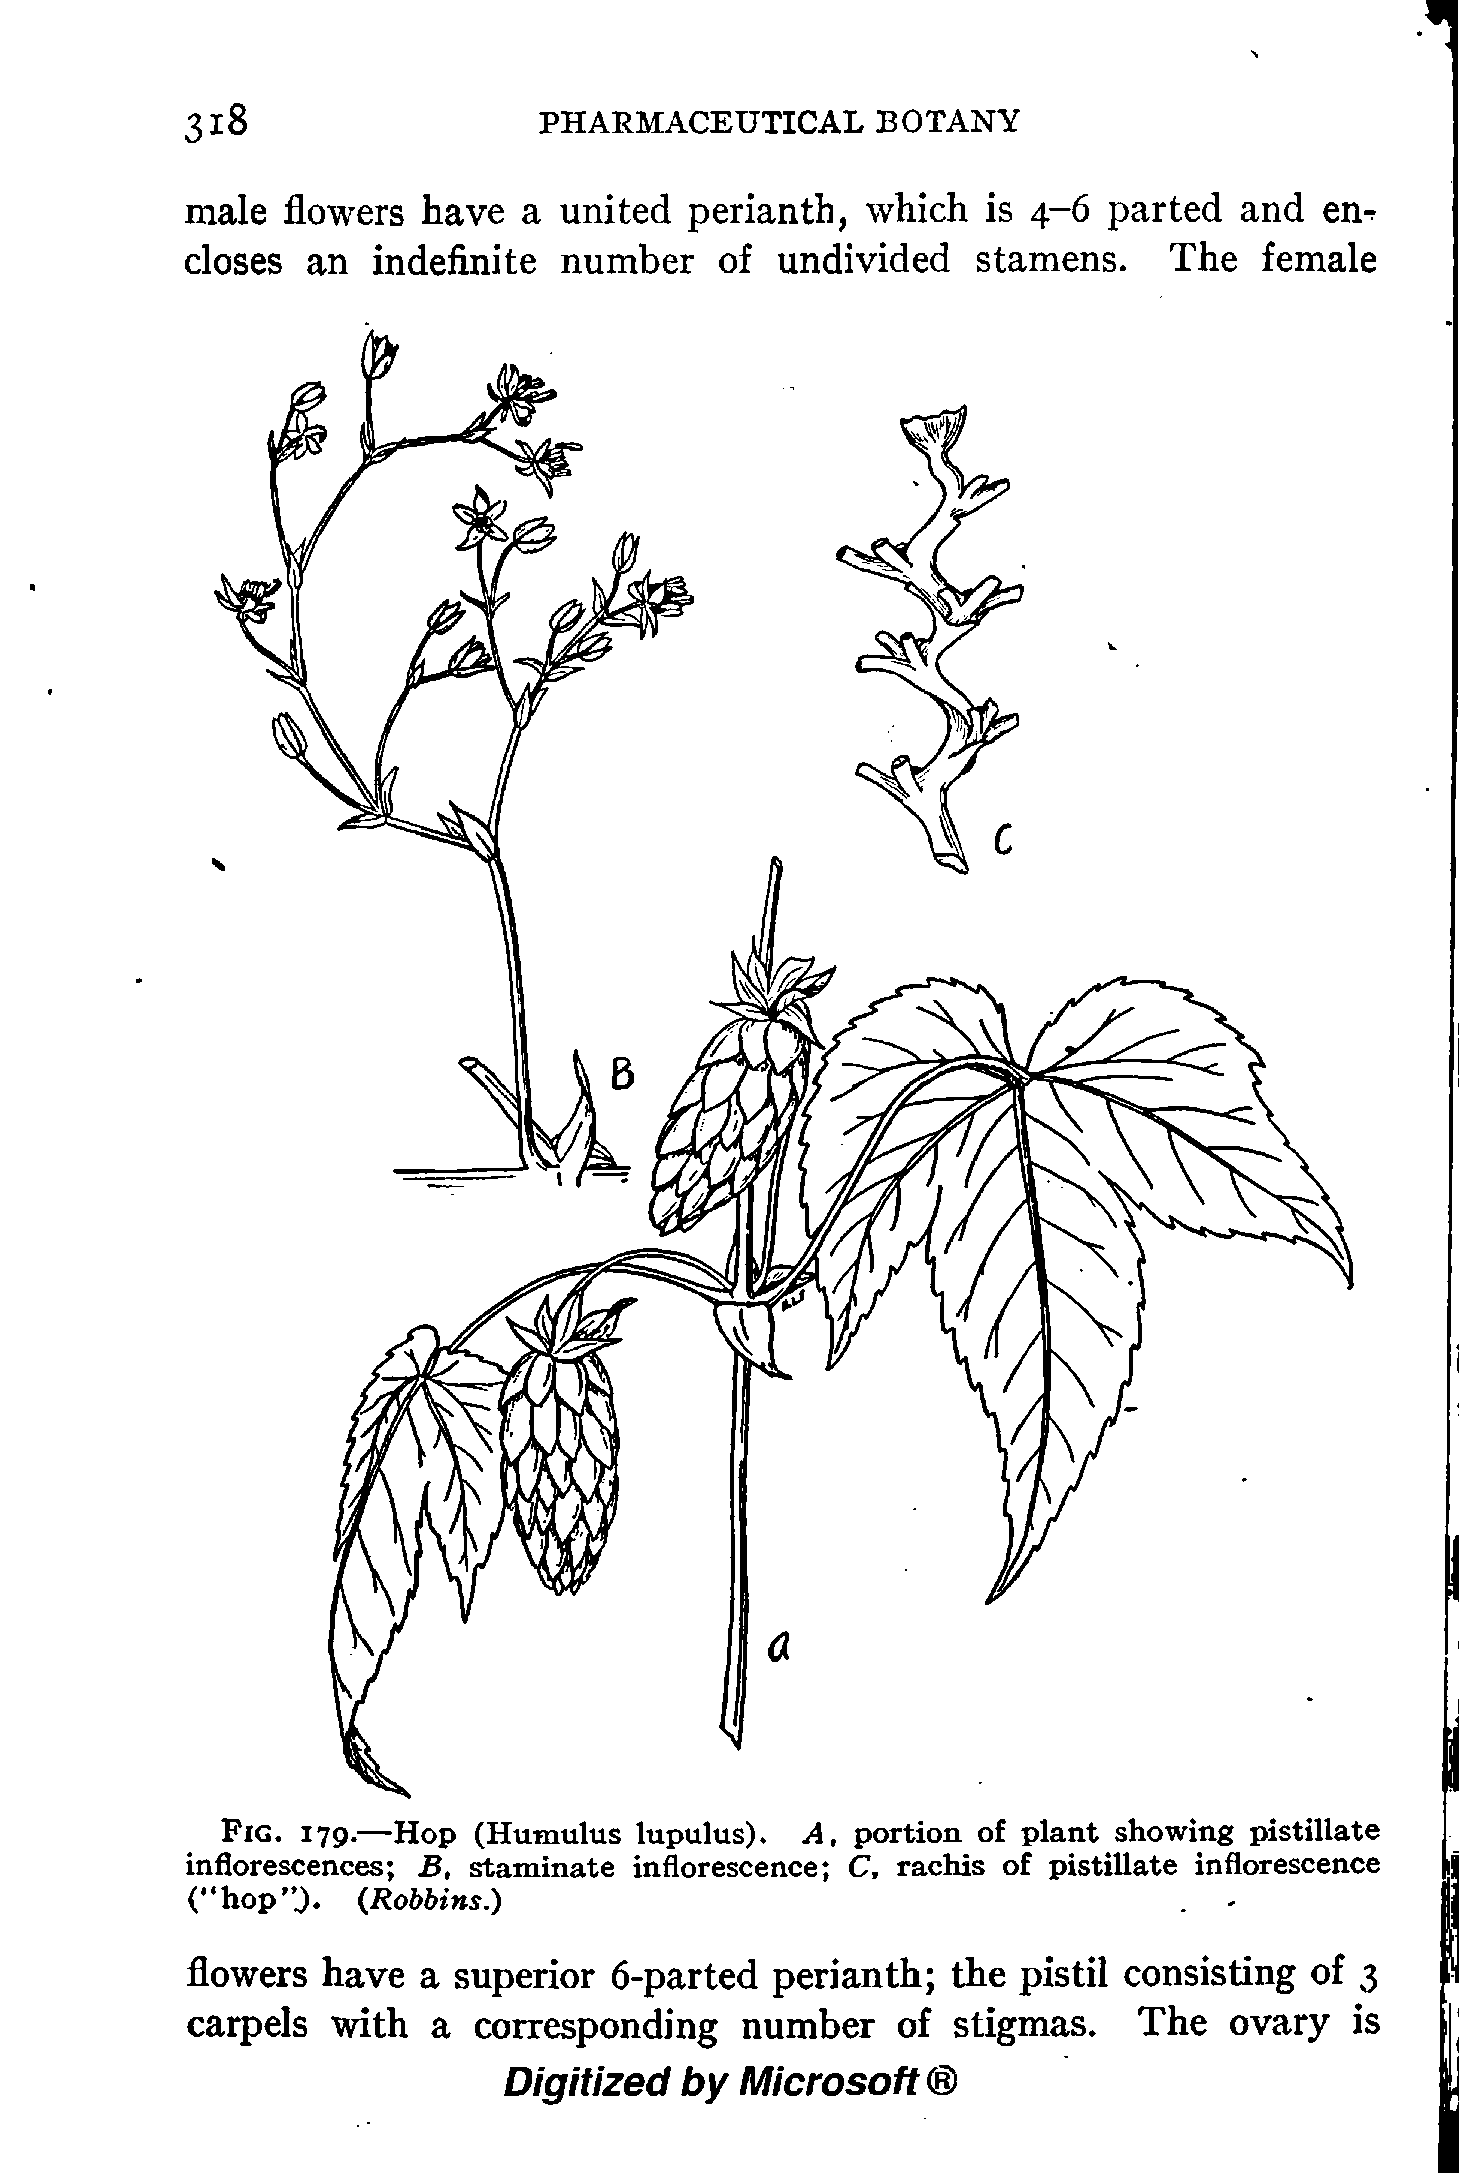 Fig. 179.—Hop (Humulus lupulus). A, portion of plant showing pistillate inflorescences B, staminate inflorescence C, rachis of pistillate inflorescence ( hop O. Robbins.)...